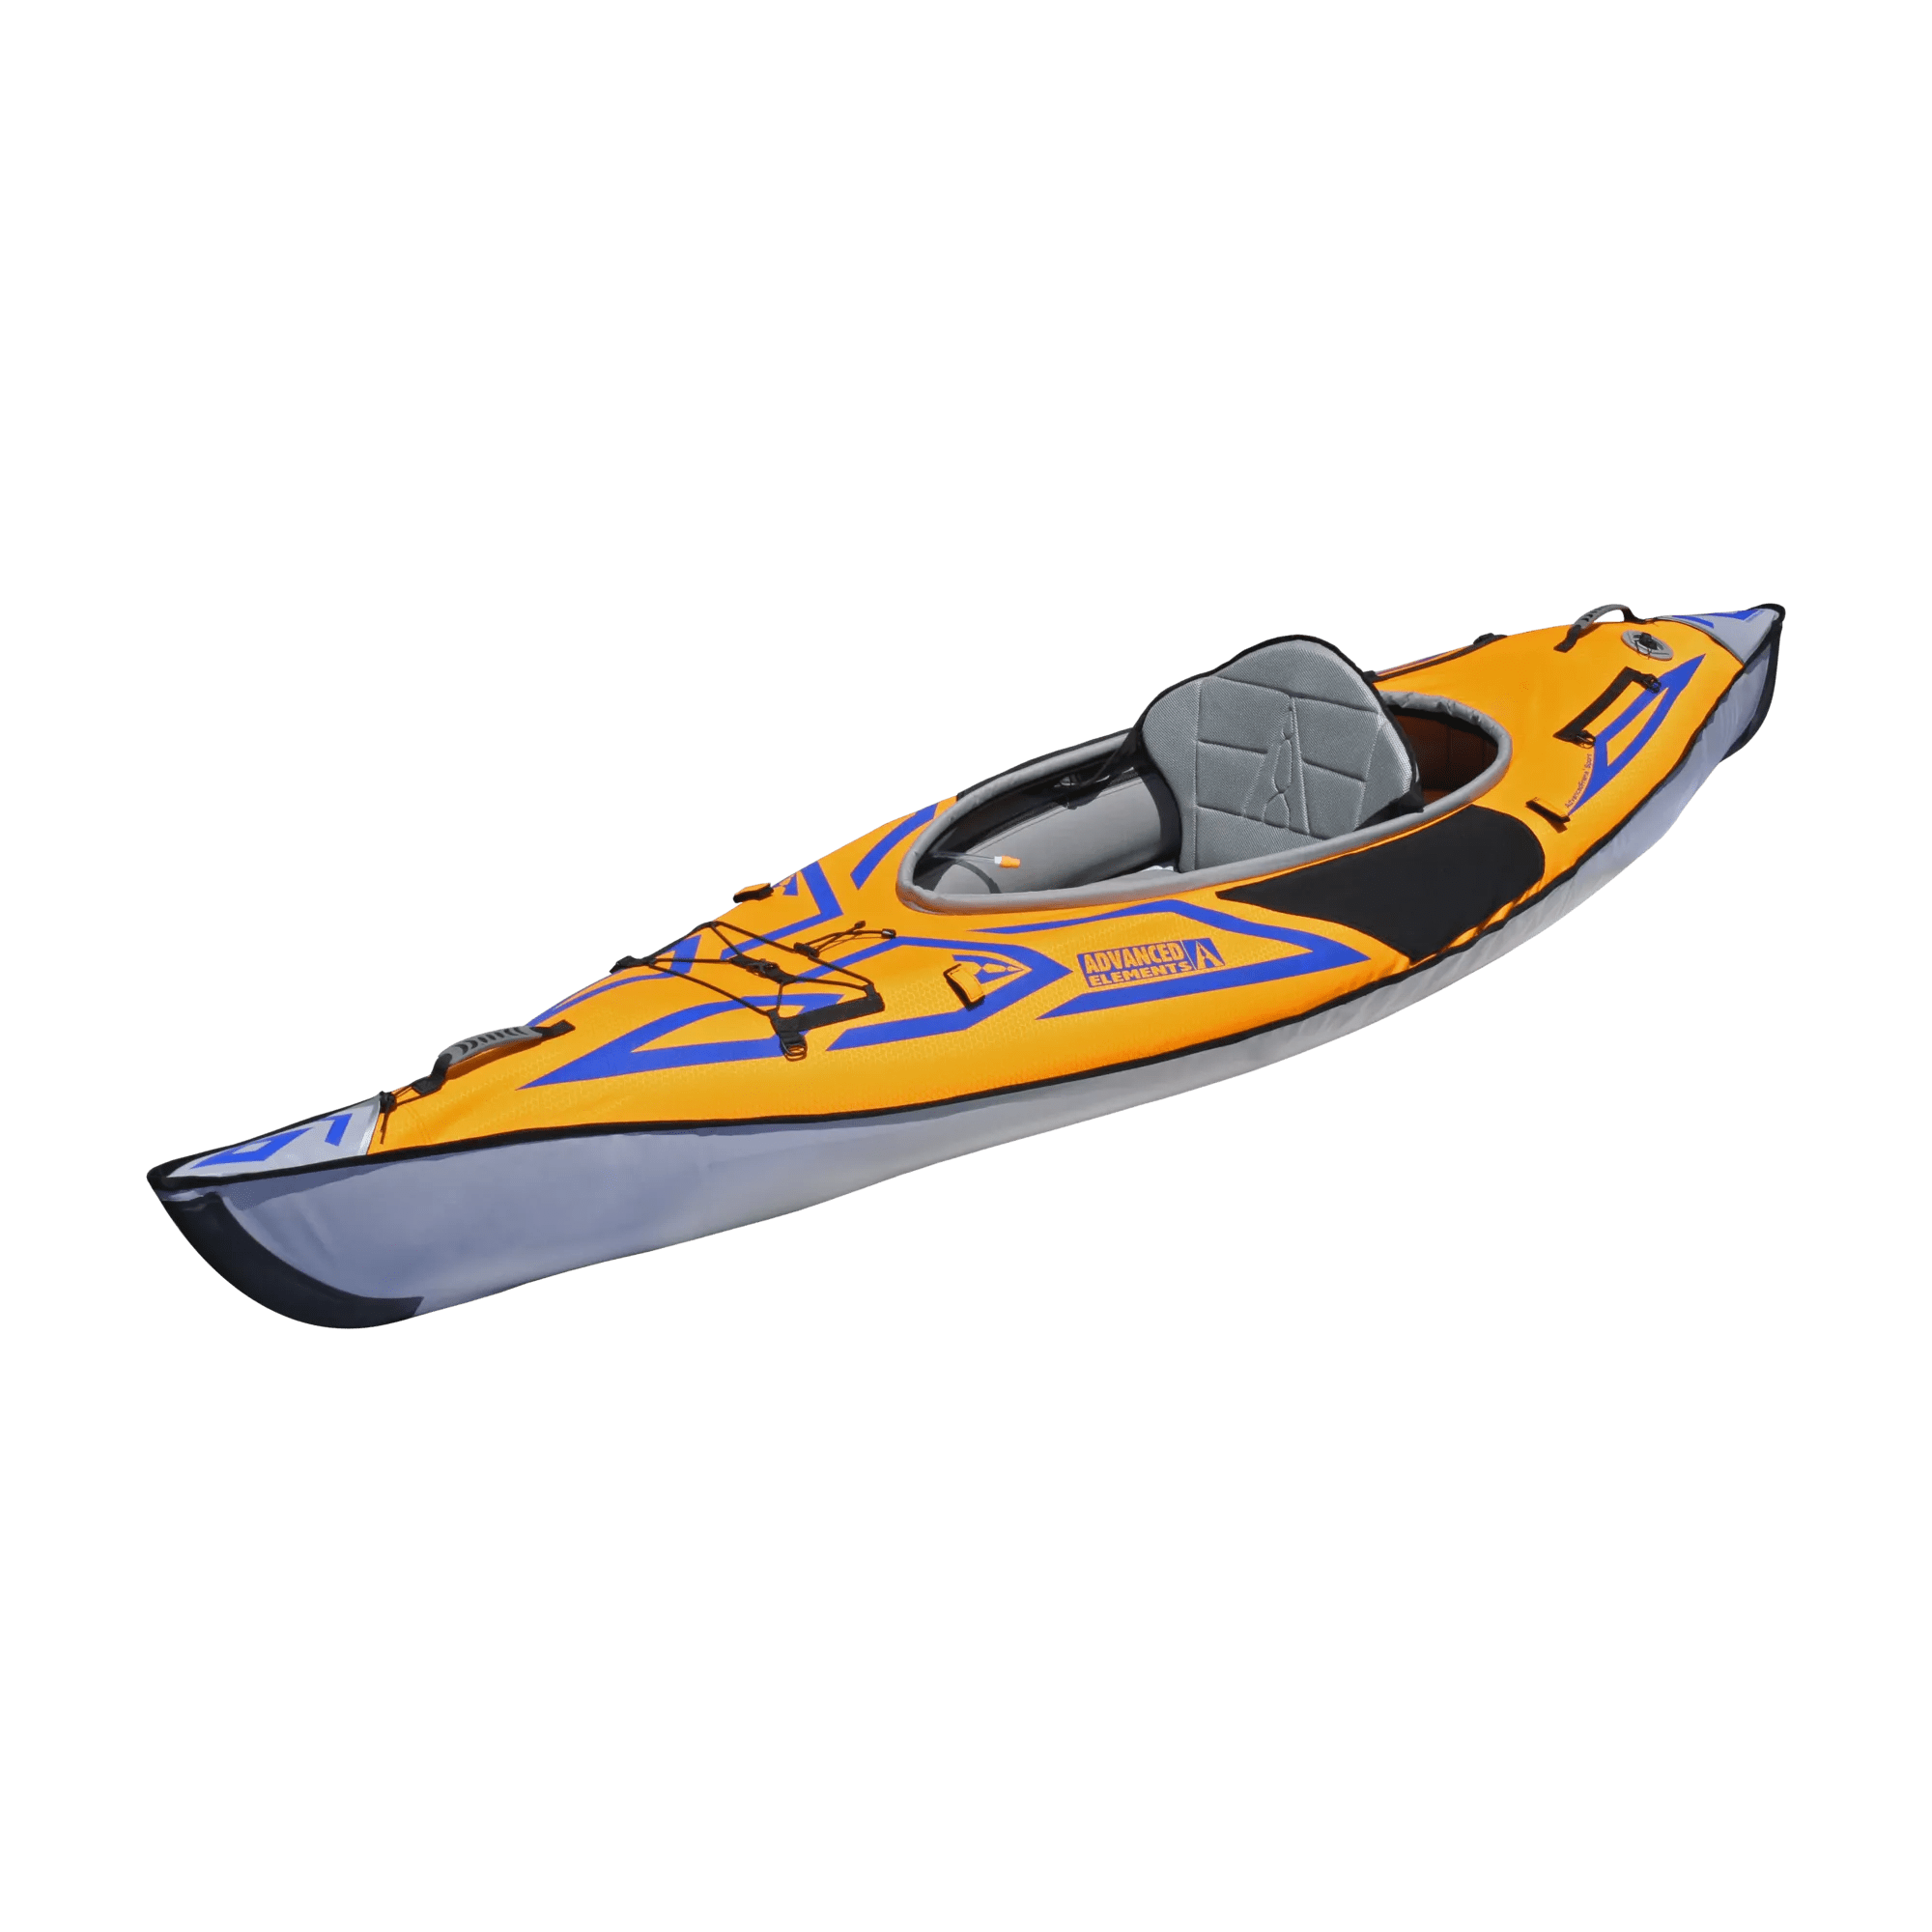 Advanced Elements AdvancedFrame Sport Kayak Without Pump for $249.99+free shipping (+ other kayaks, stand up paddleboards and accessories at half price))